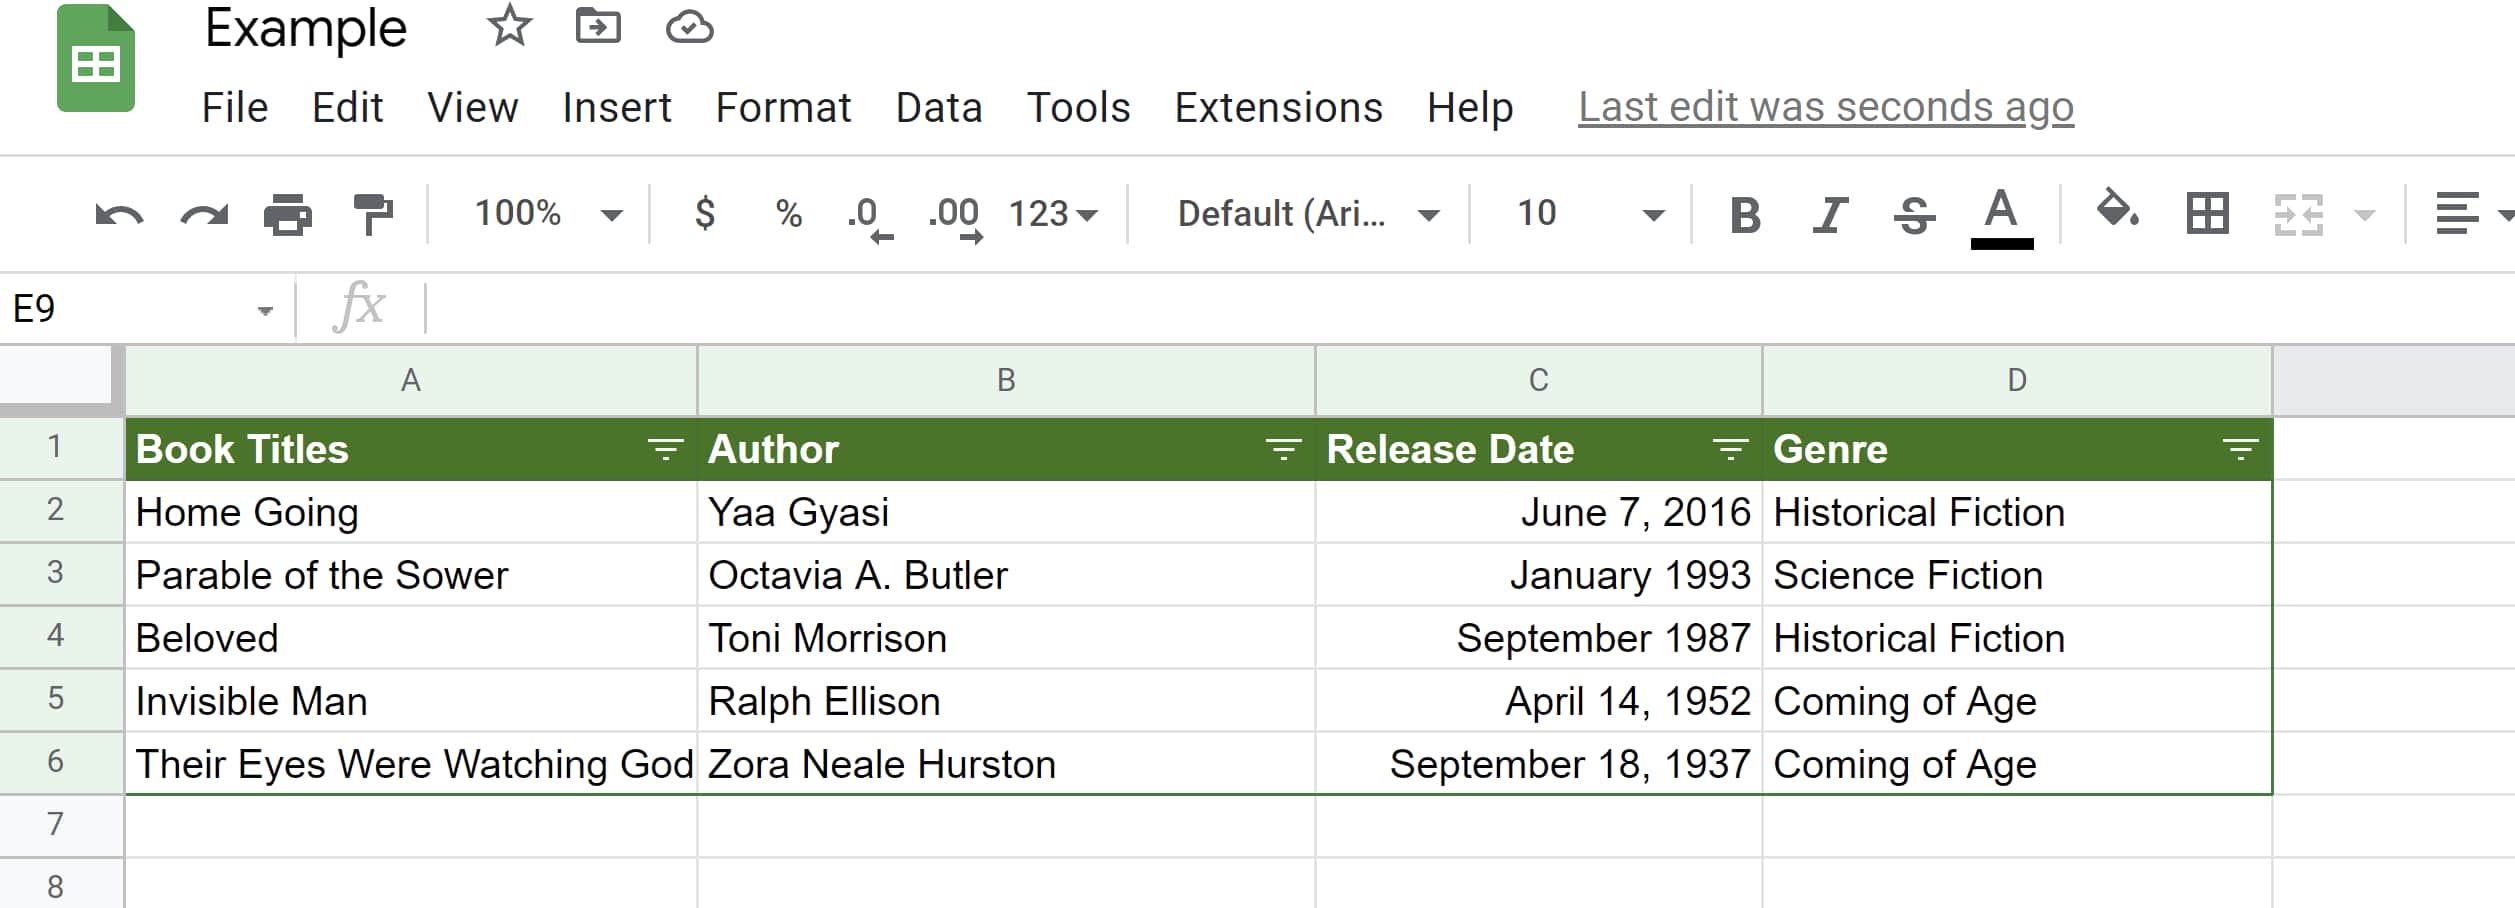 Filters created for columns within Google Sheet graph